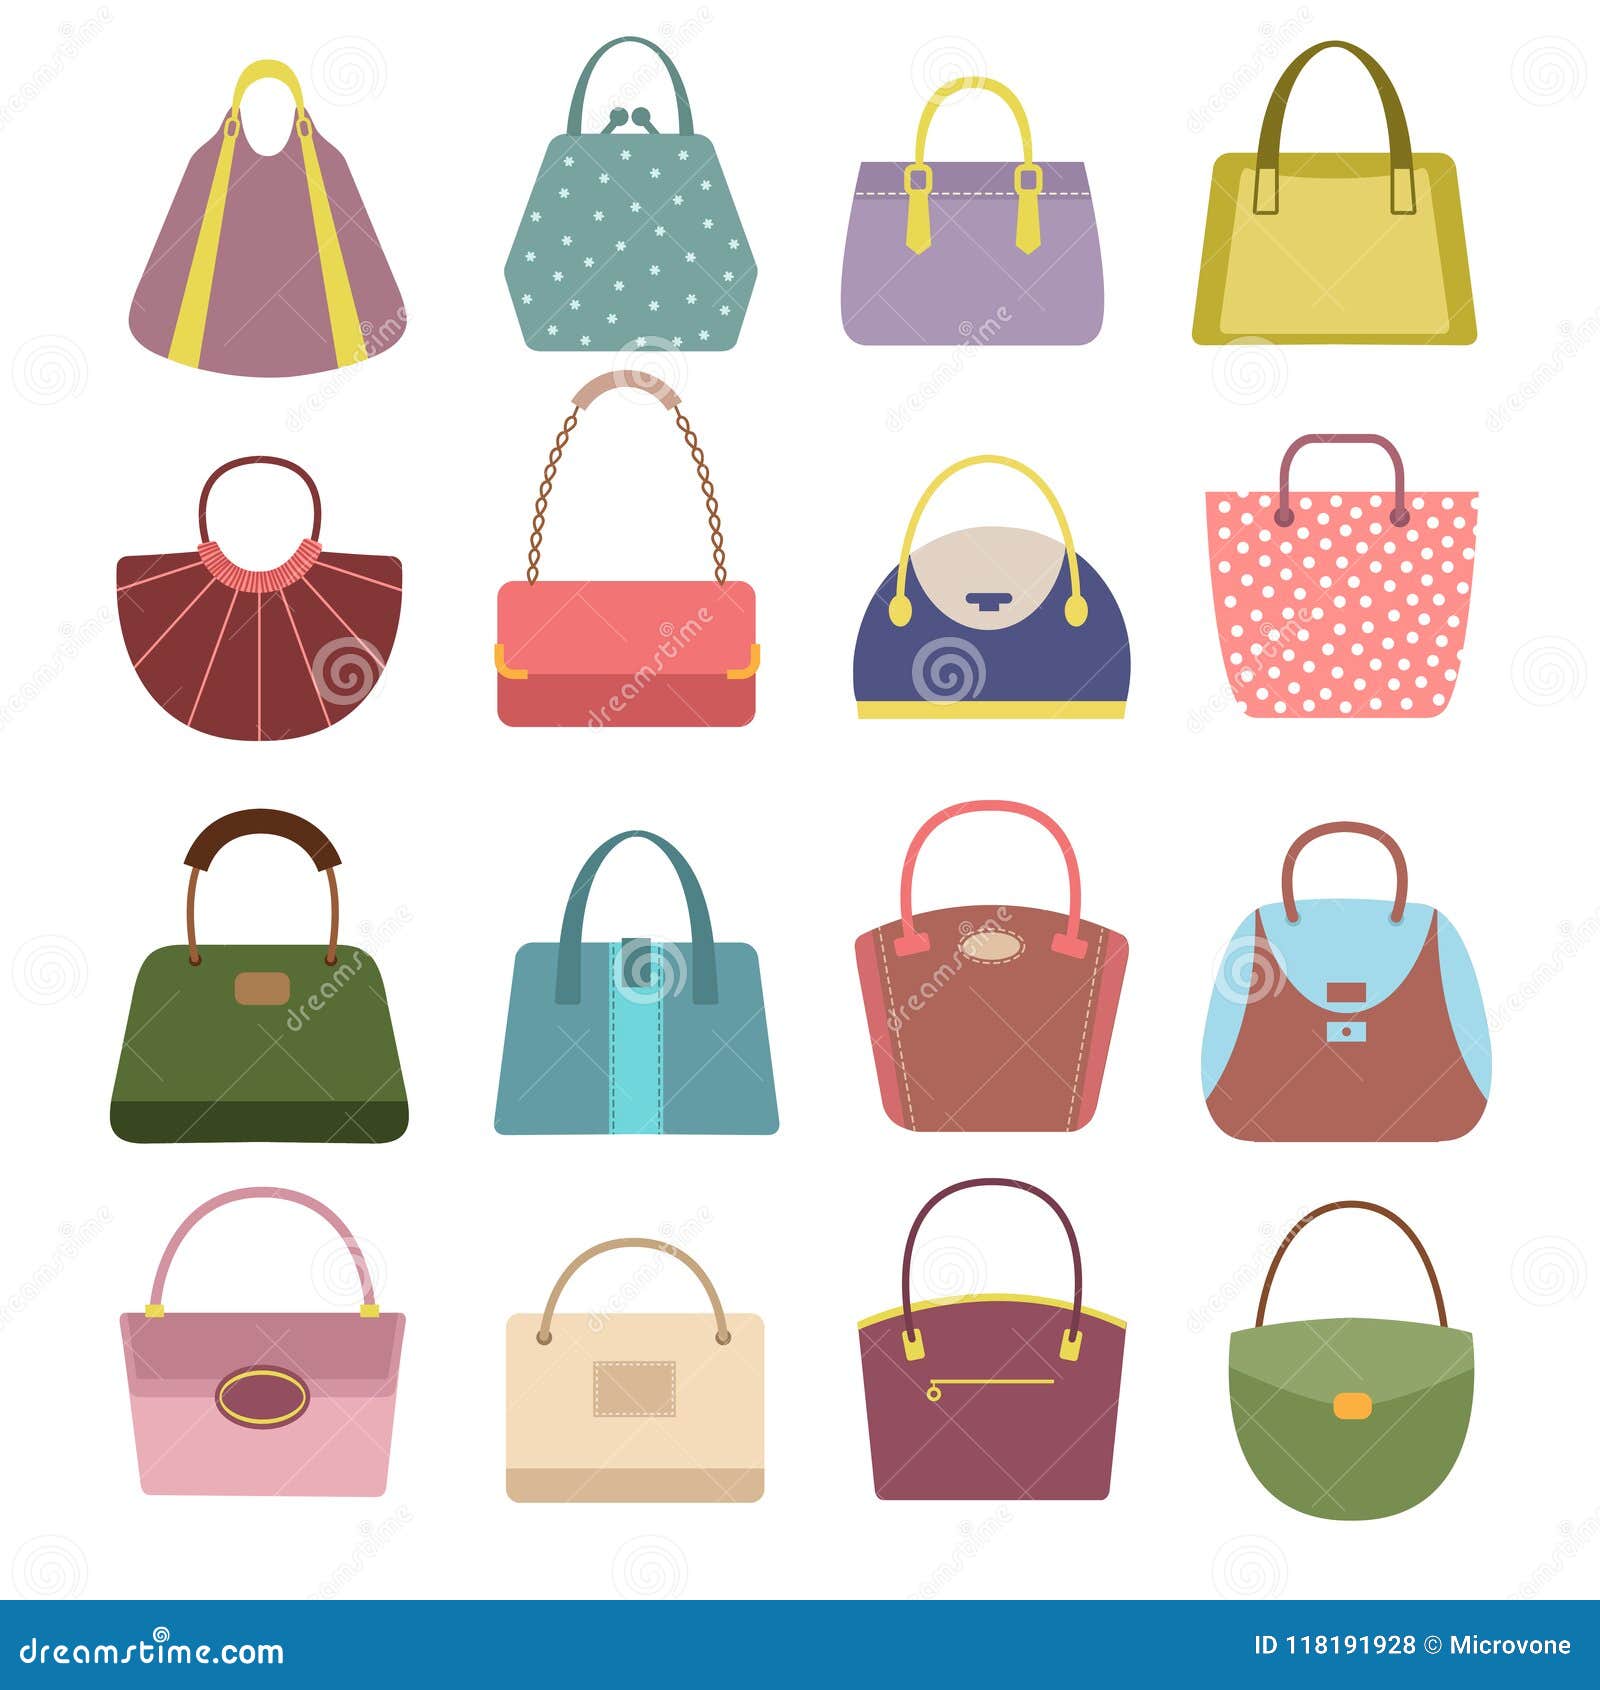 PURSE 101: Your Ultimate Guide to the Different Types of Handbags